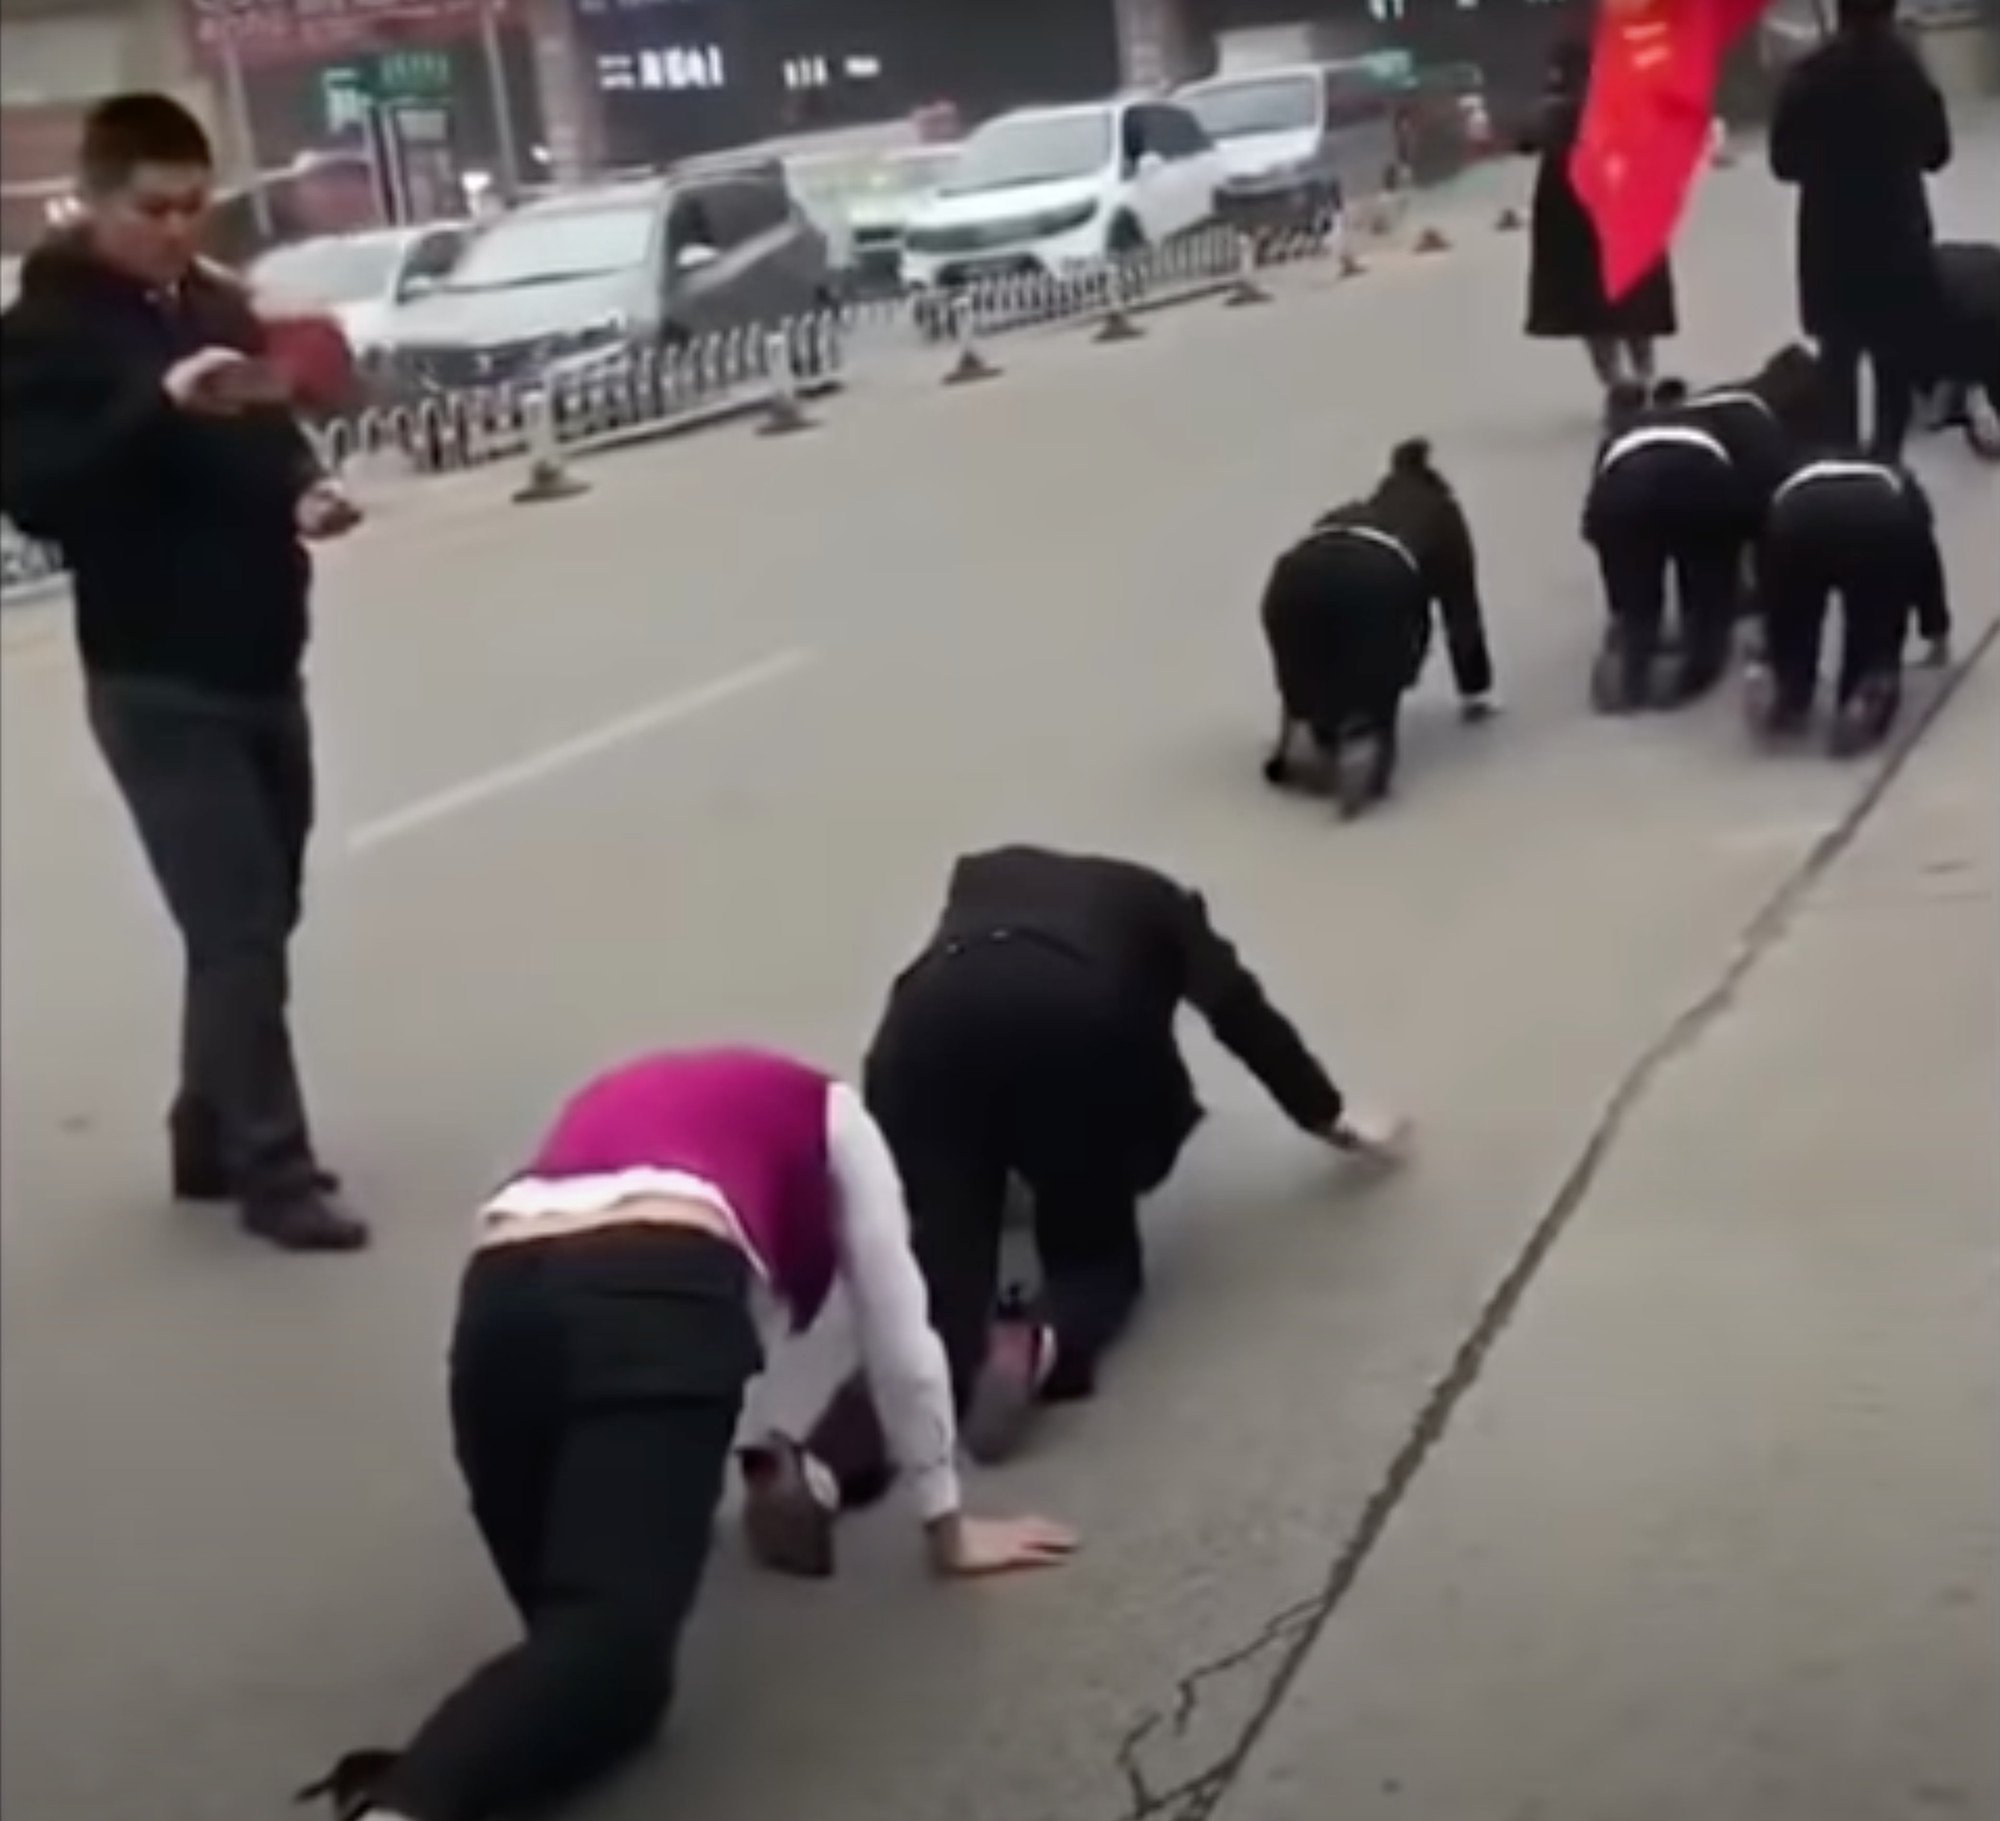 Bizarre corporate rituals to promote discipline and motivation are not unusual in China. Photo: handout